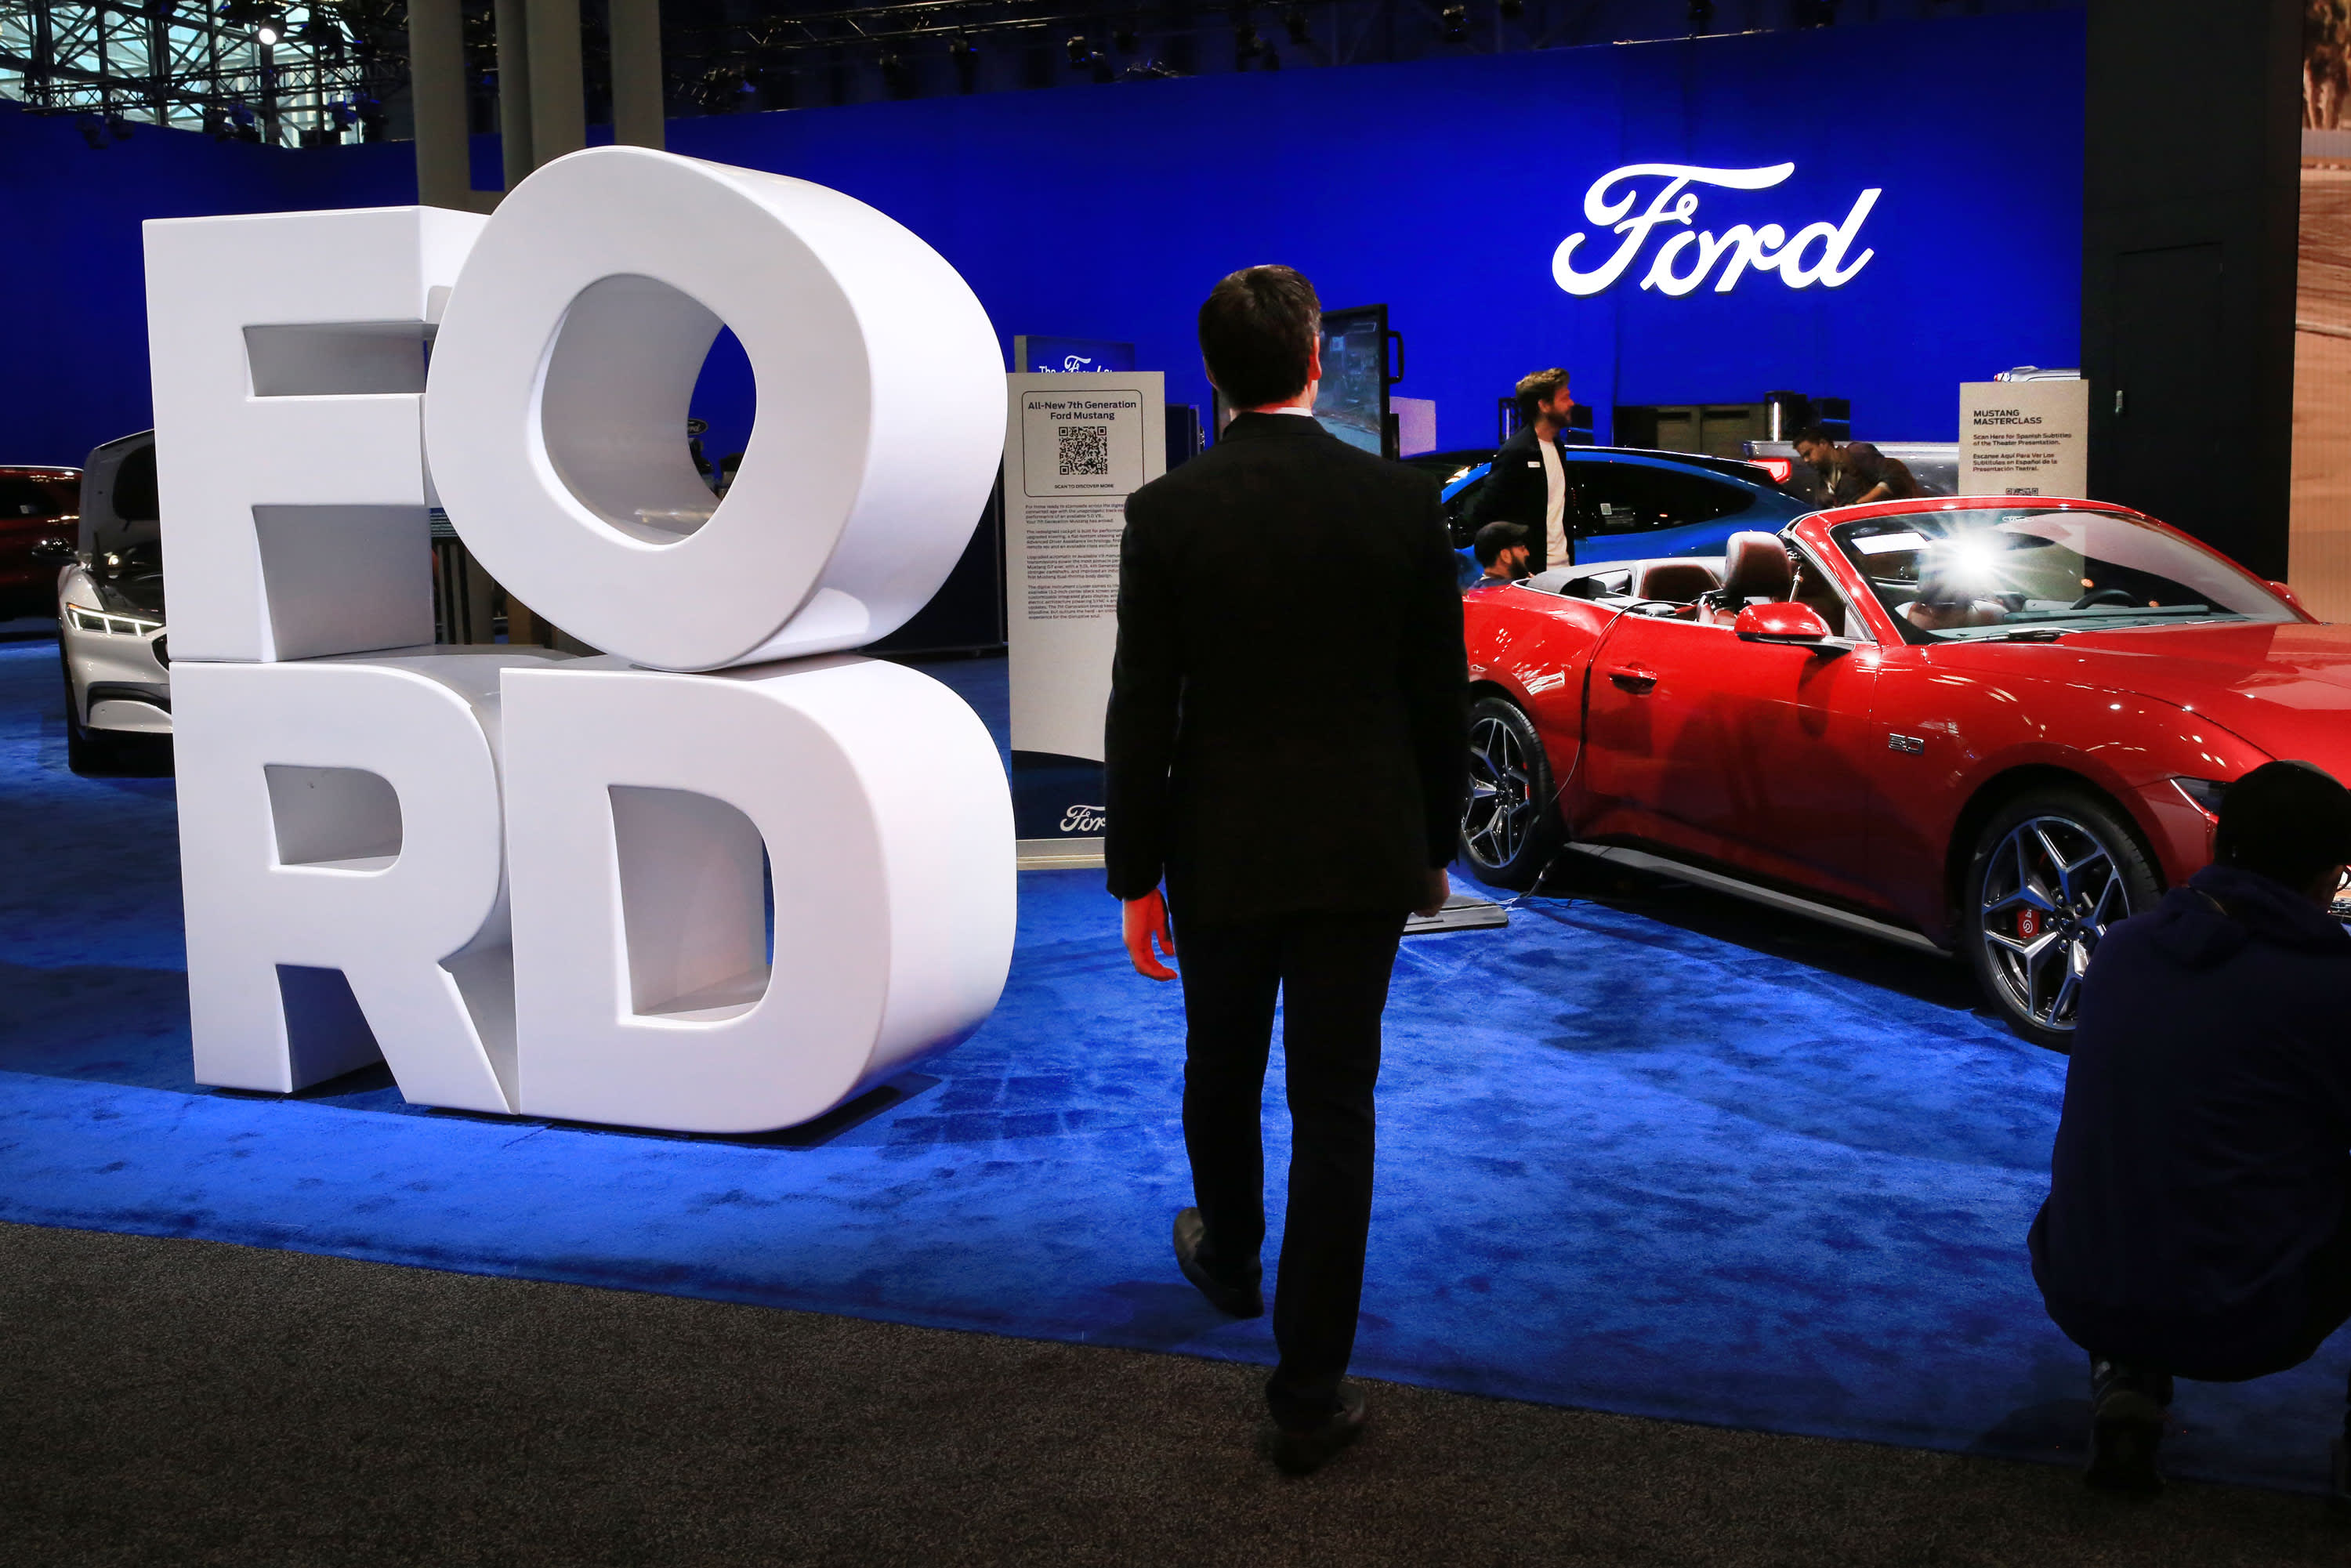 Ford's EV push has its skeptics. After Monday's investor day, Jim Cramer is still not one of them